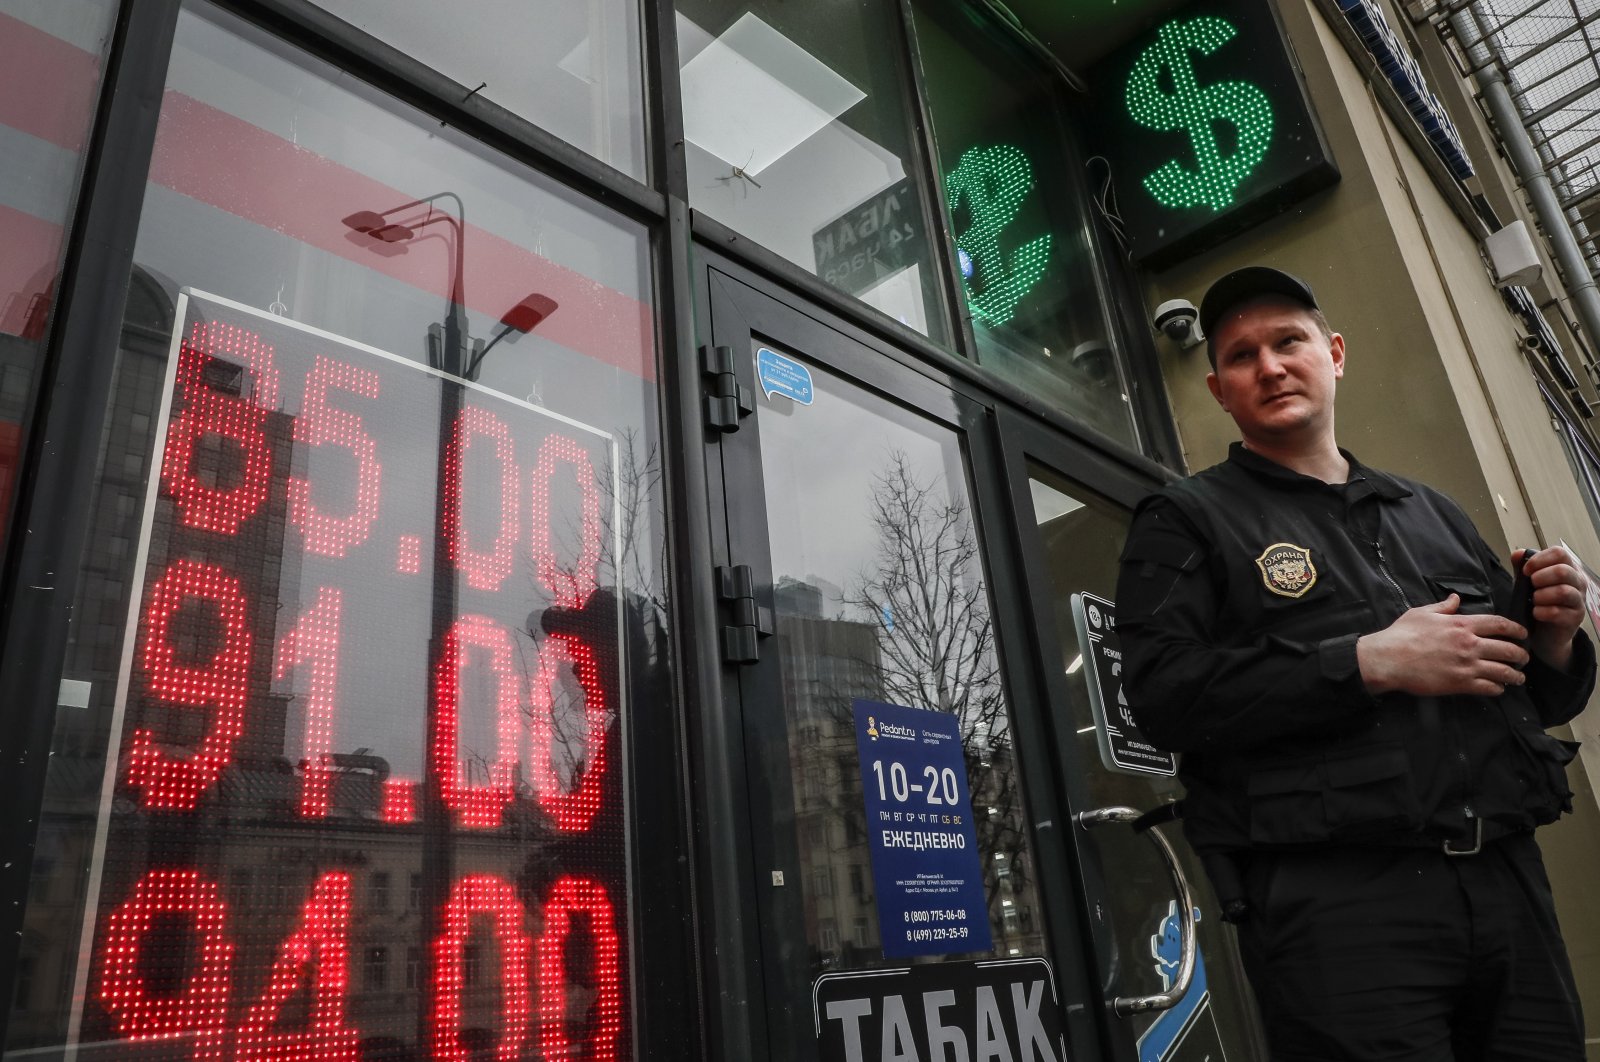 A security guard stands in front of an exchange office with a screen displaying the exchange rates of the euro and U.S. dollar to Russian rubles in Moscow, Russia, March 31, 2022. (EPA Photo)